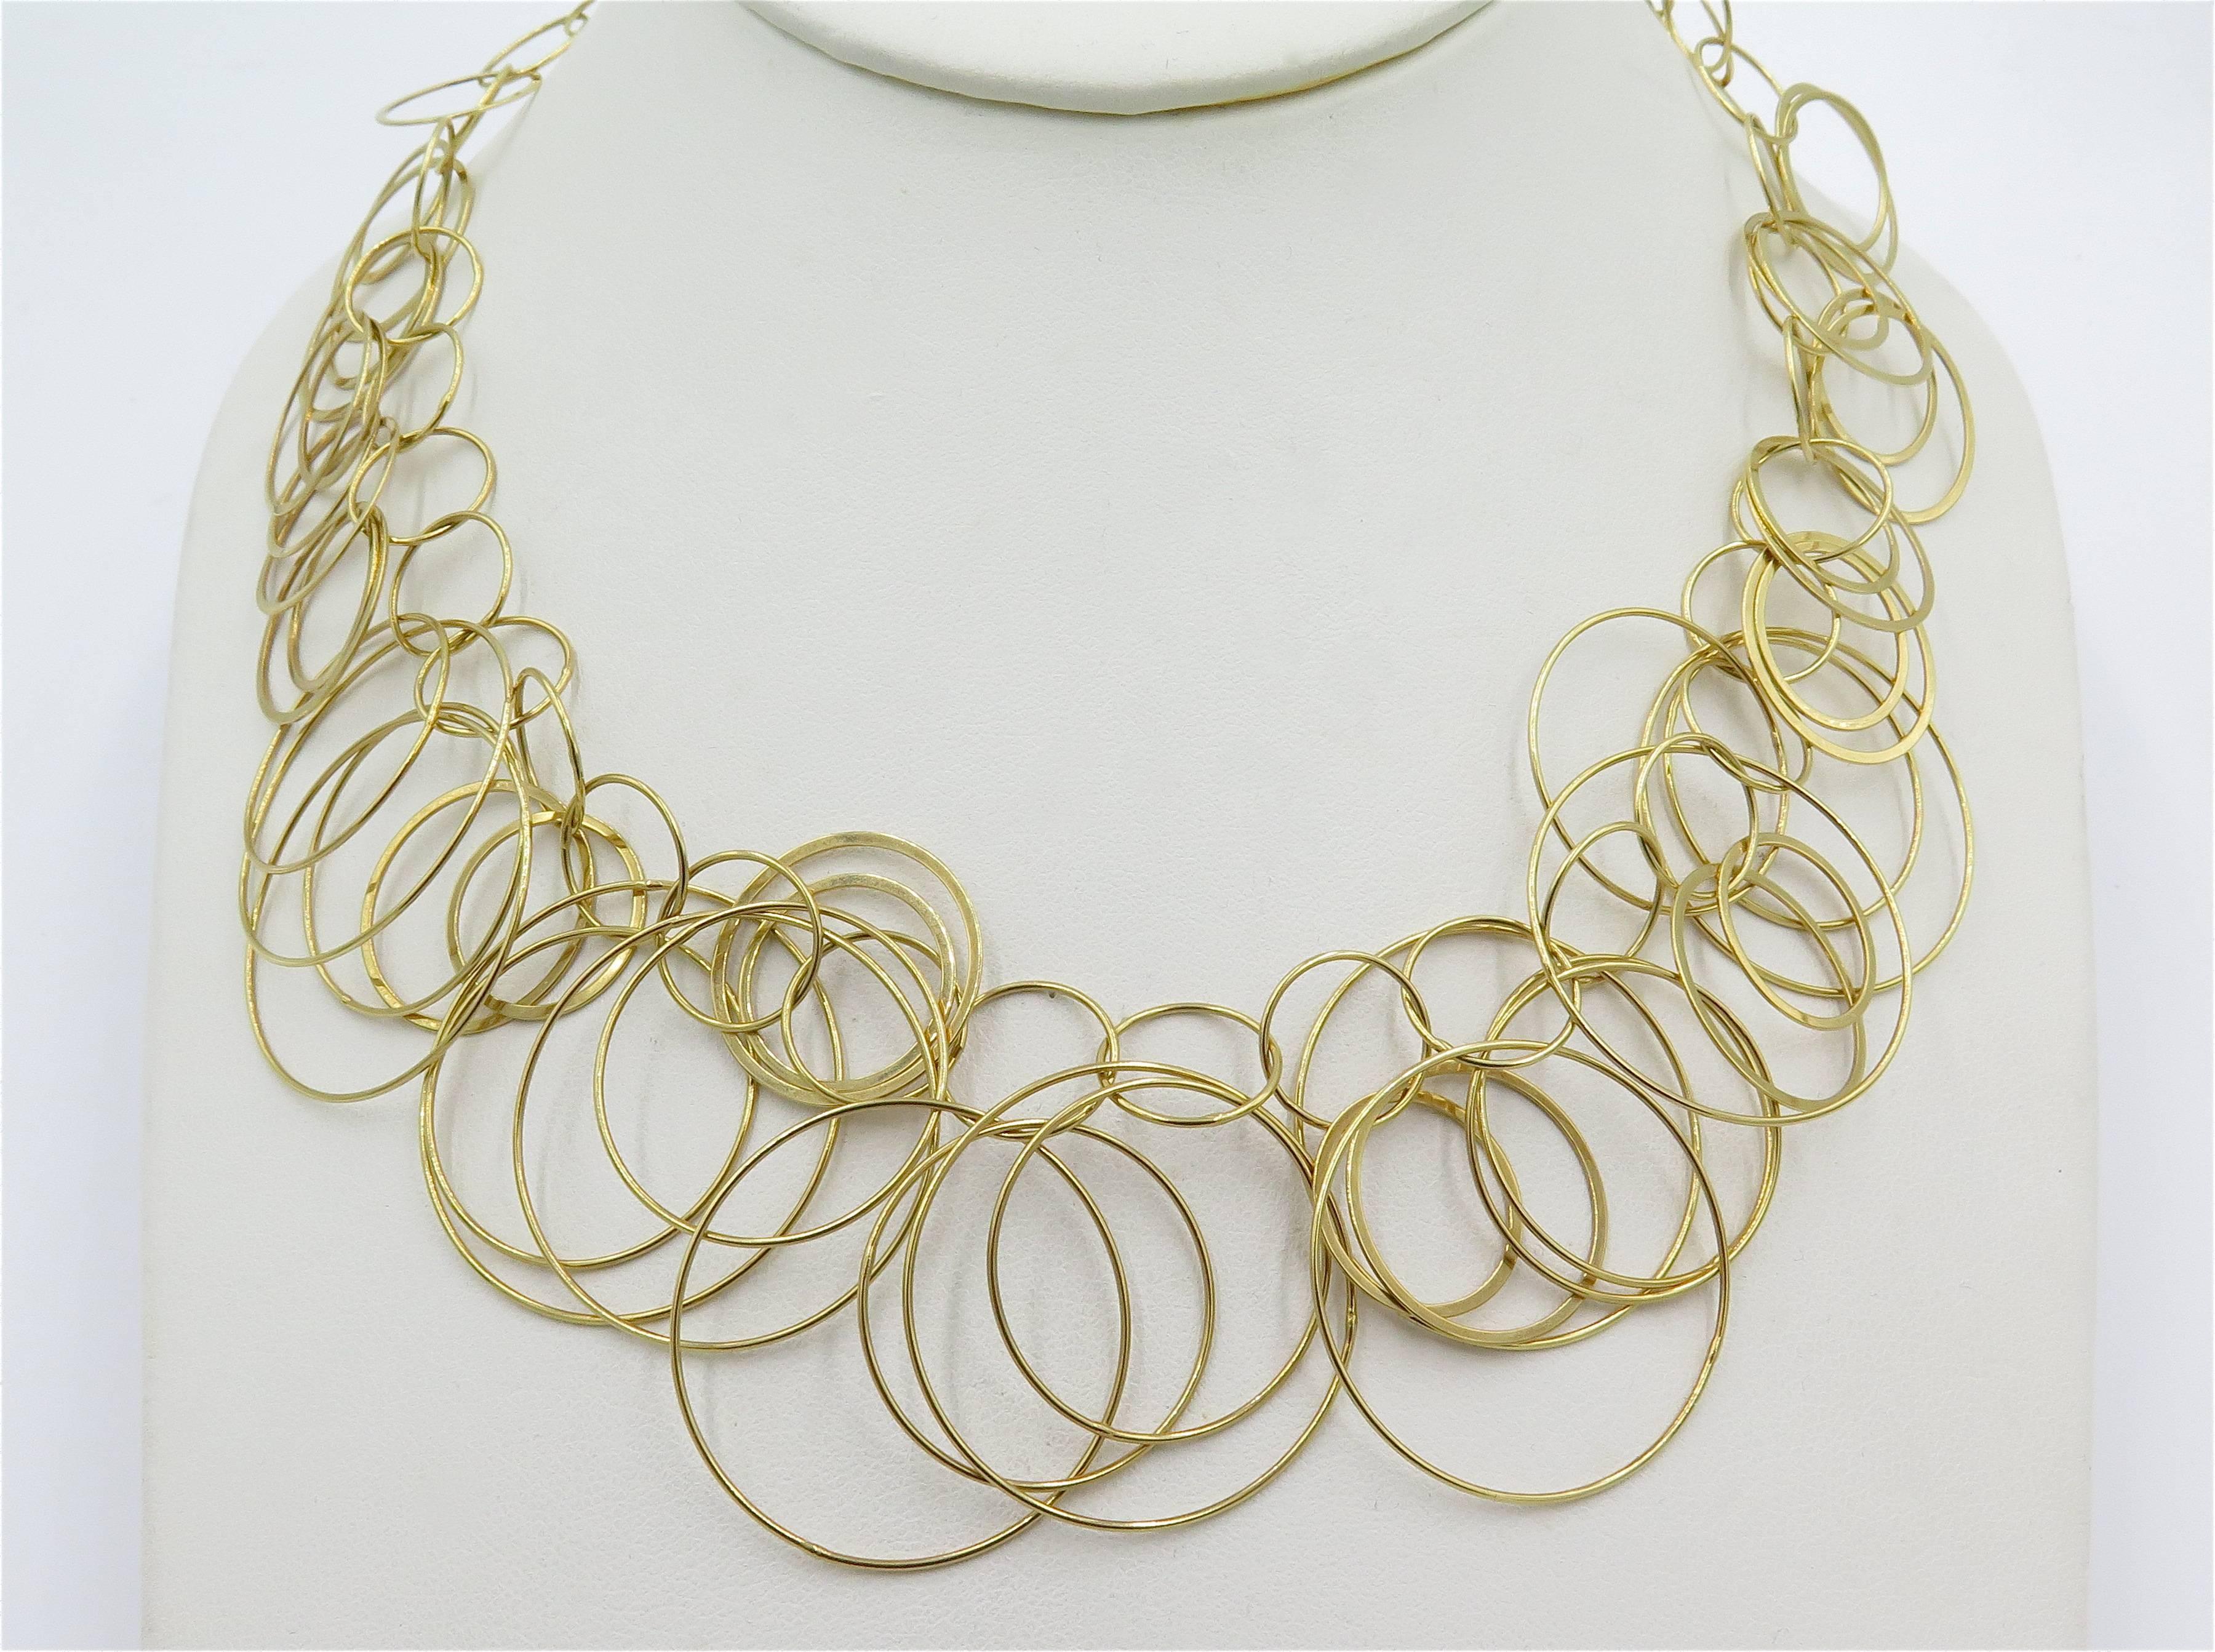 An 18 kararat yellow gold necklace. Carolina Bucci. Italian. Designed as a graduated bib composed of interlocking polished gold rings. With Italian maker’s mark. Unsigned, attributed to Carolina Bucci. Length is approximately 16 inches. Gross weight